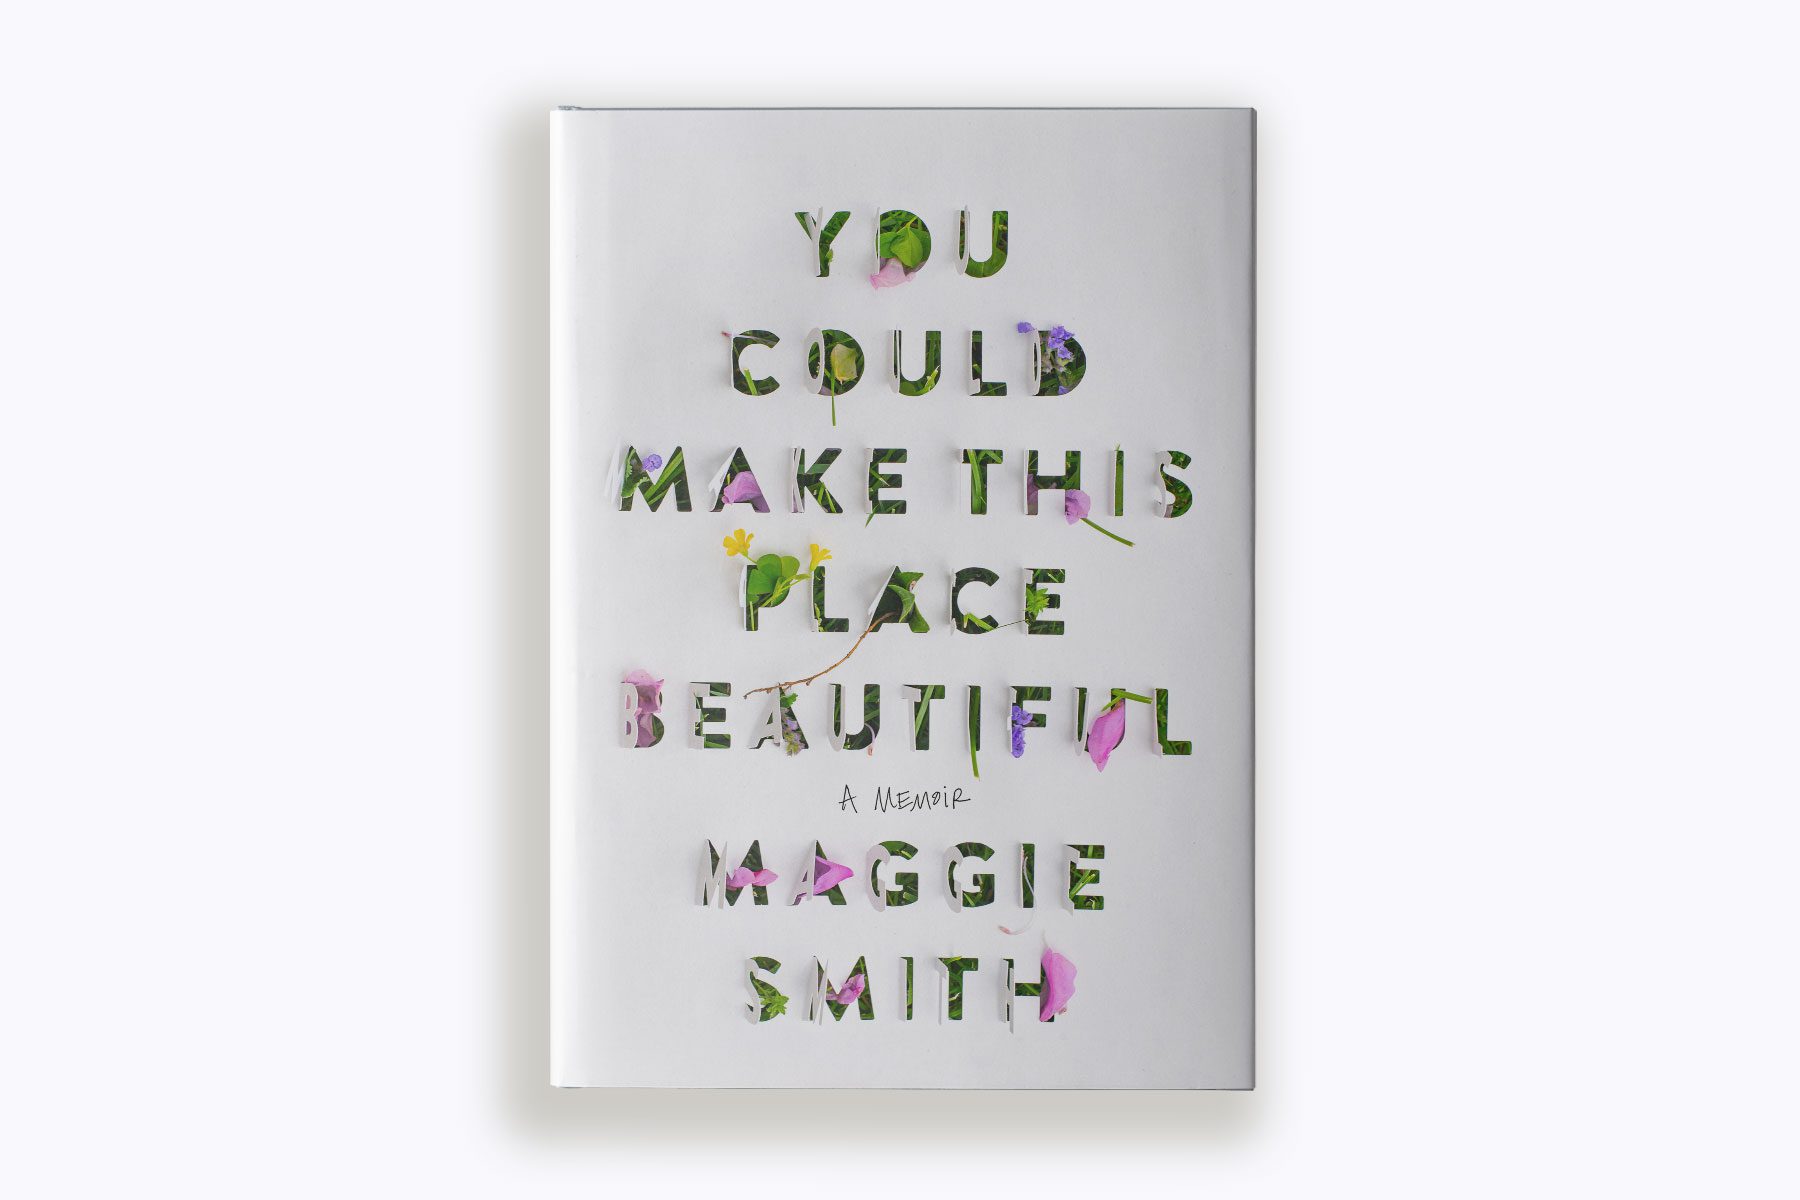 A photo illustration of "You Could Make This Place Beautiful" book cover.